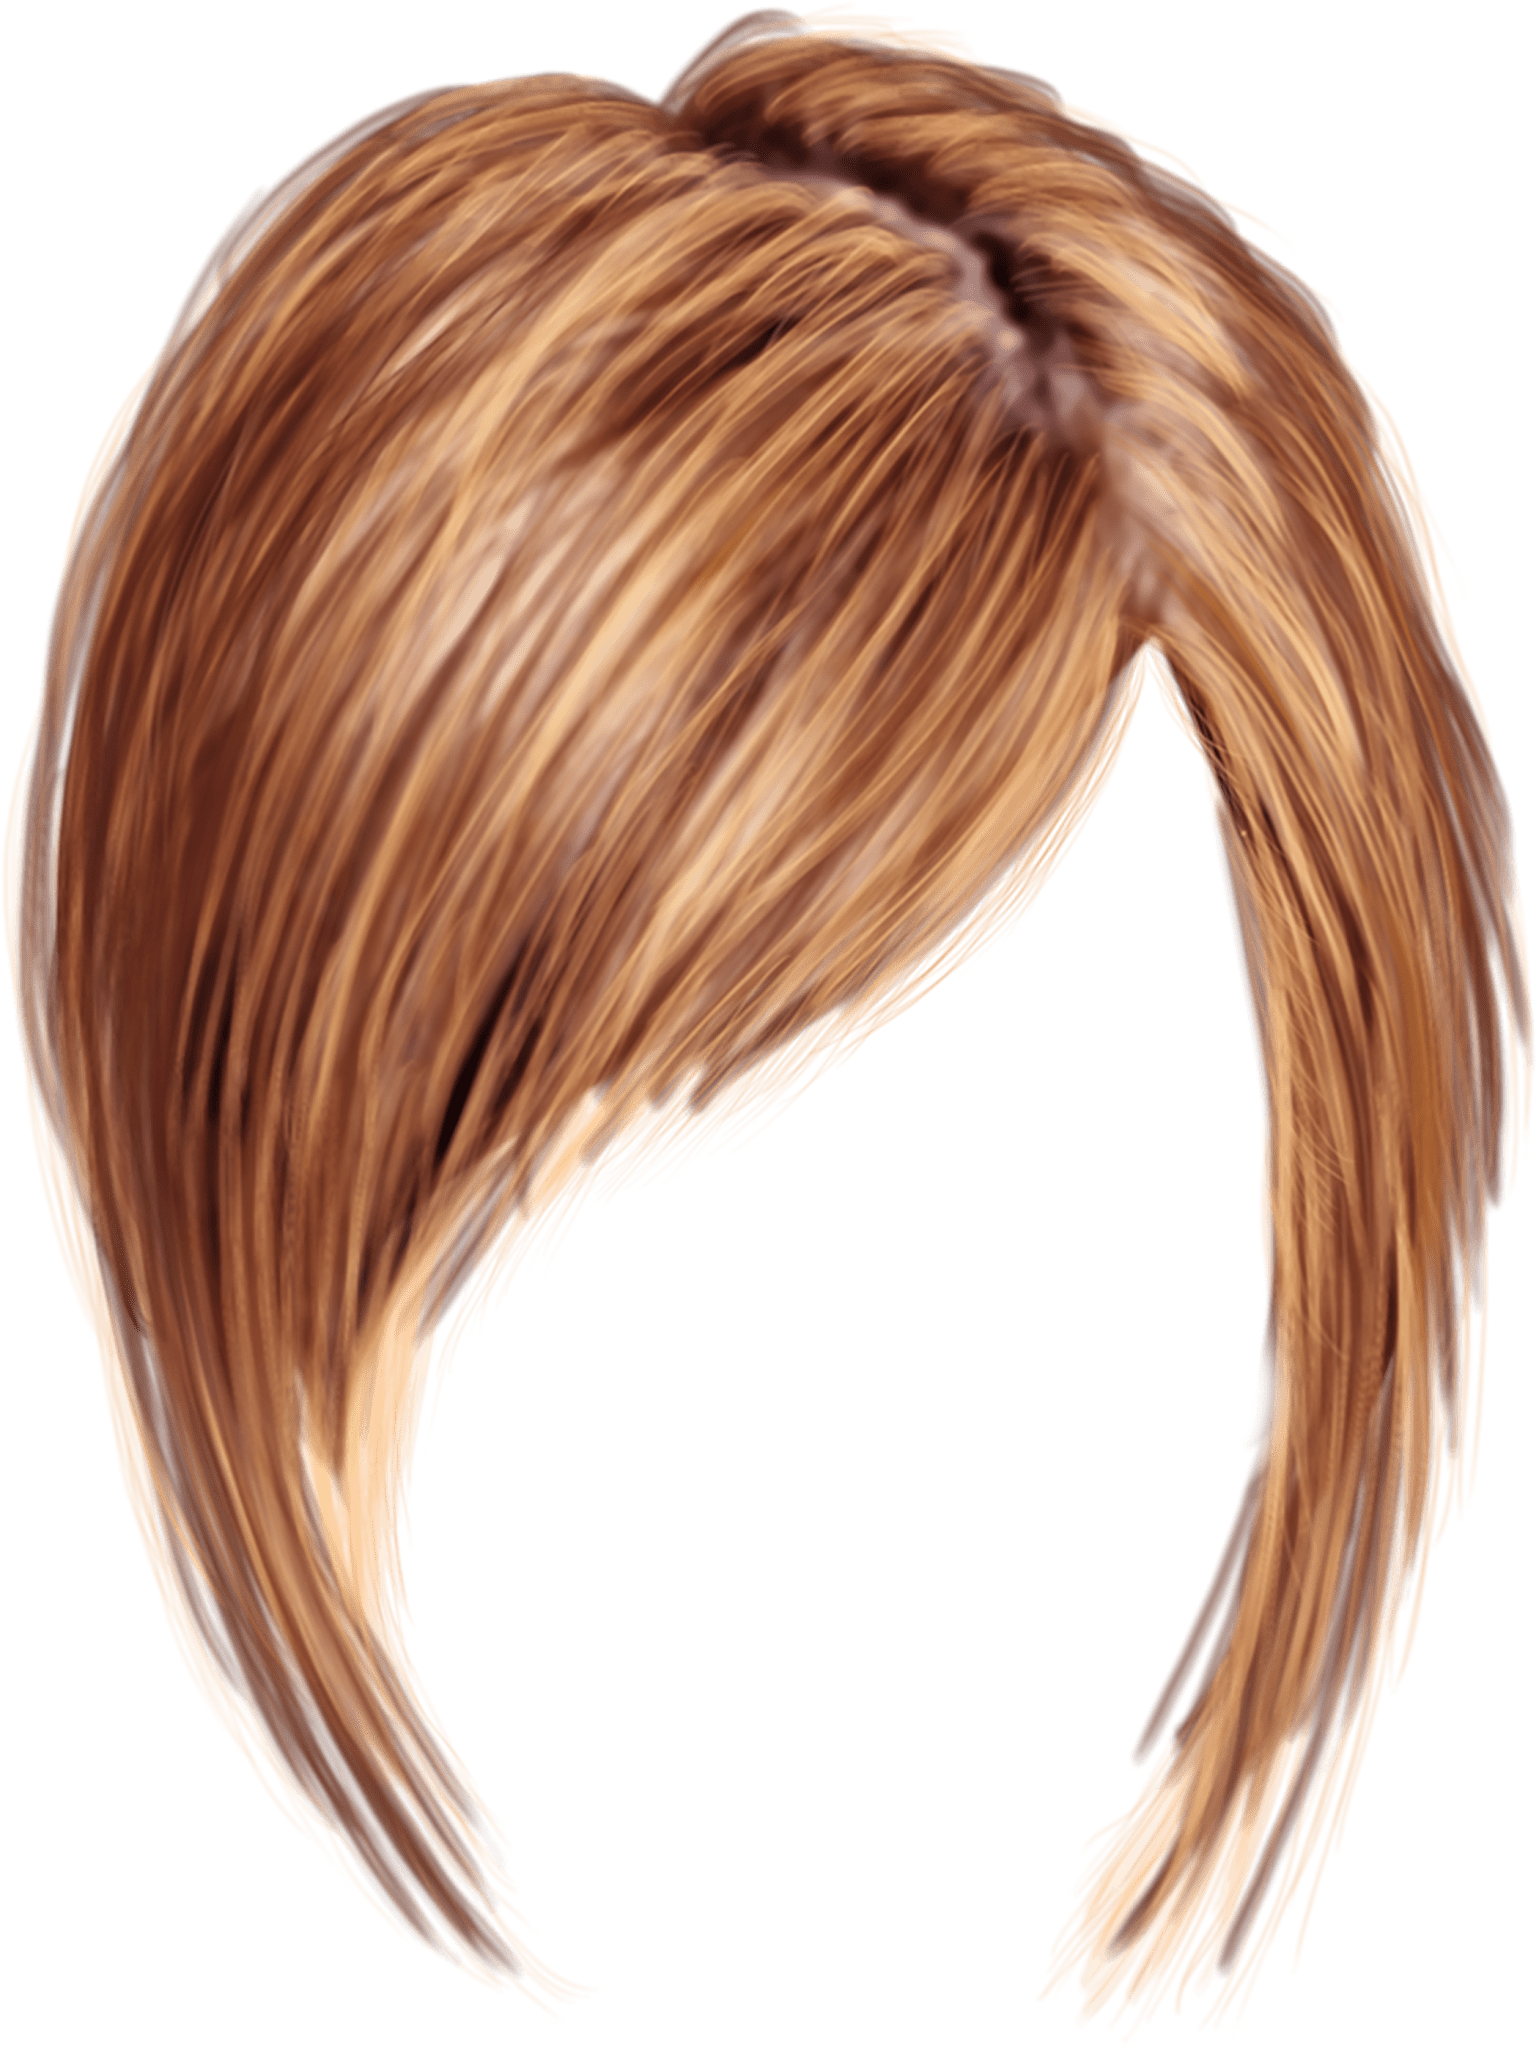 Hairstyle Woman Clip art - hair png download - 1539*2048 - Free Transparent Hair  png Download. - Clip Art Library